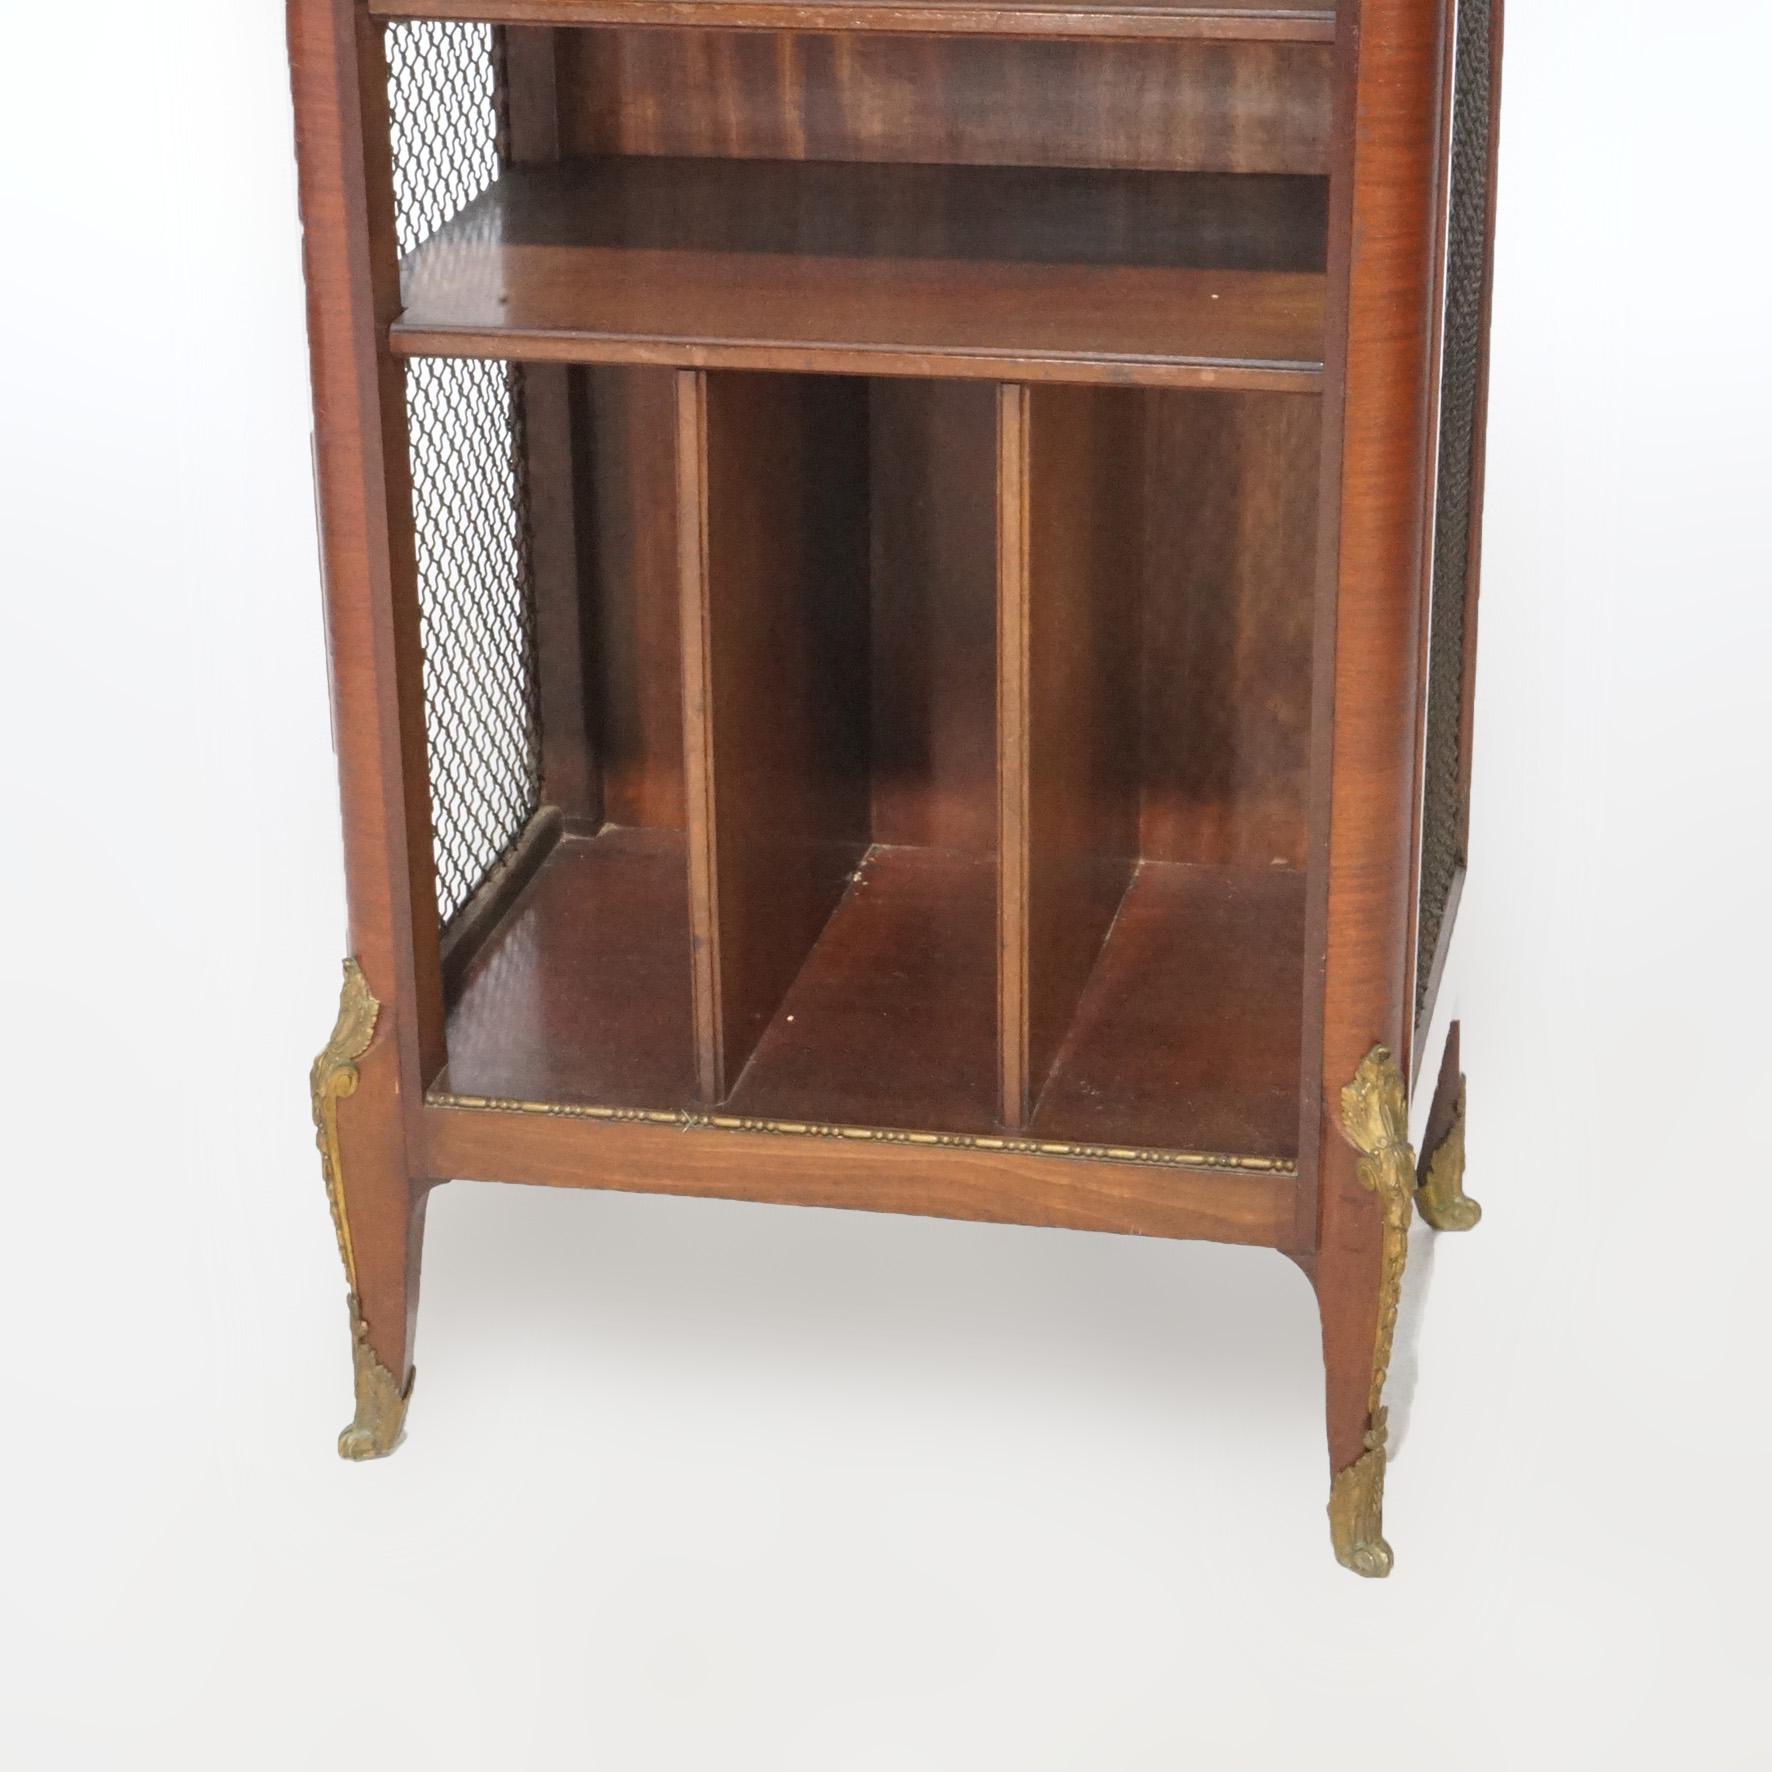 Antique French Kingwood & Satinwood Music Cabinet with Ormolu Mounts circa 1920 For Sale 1